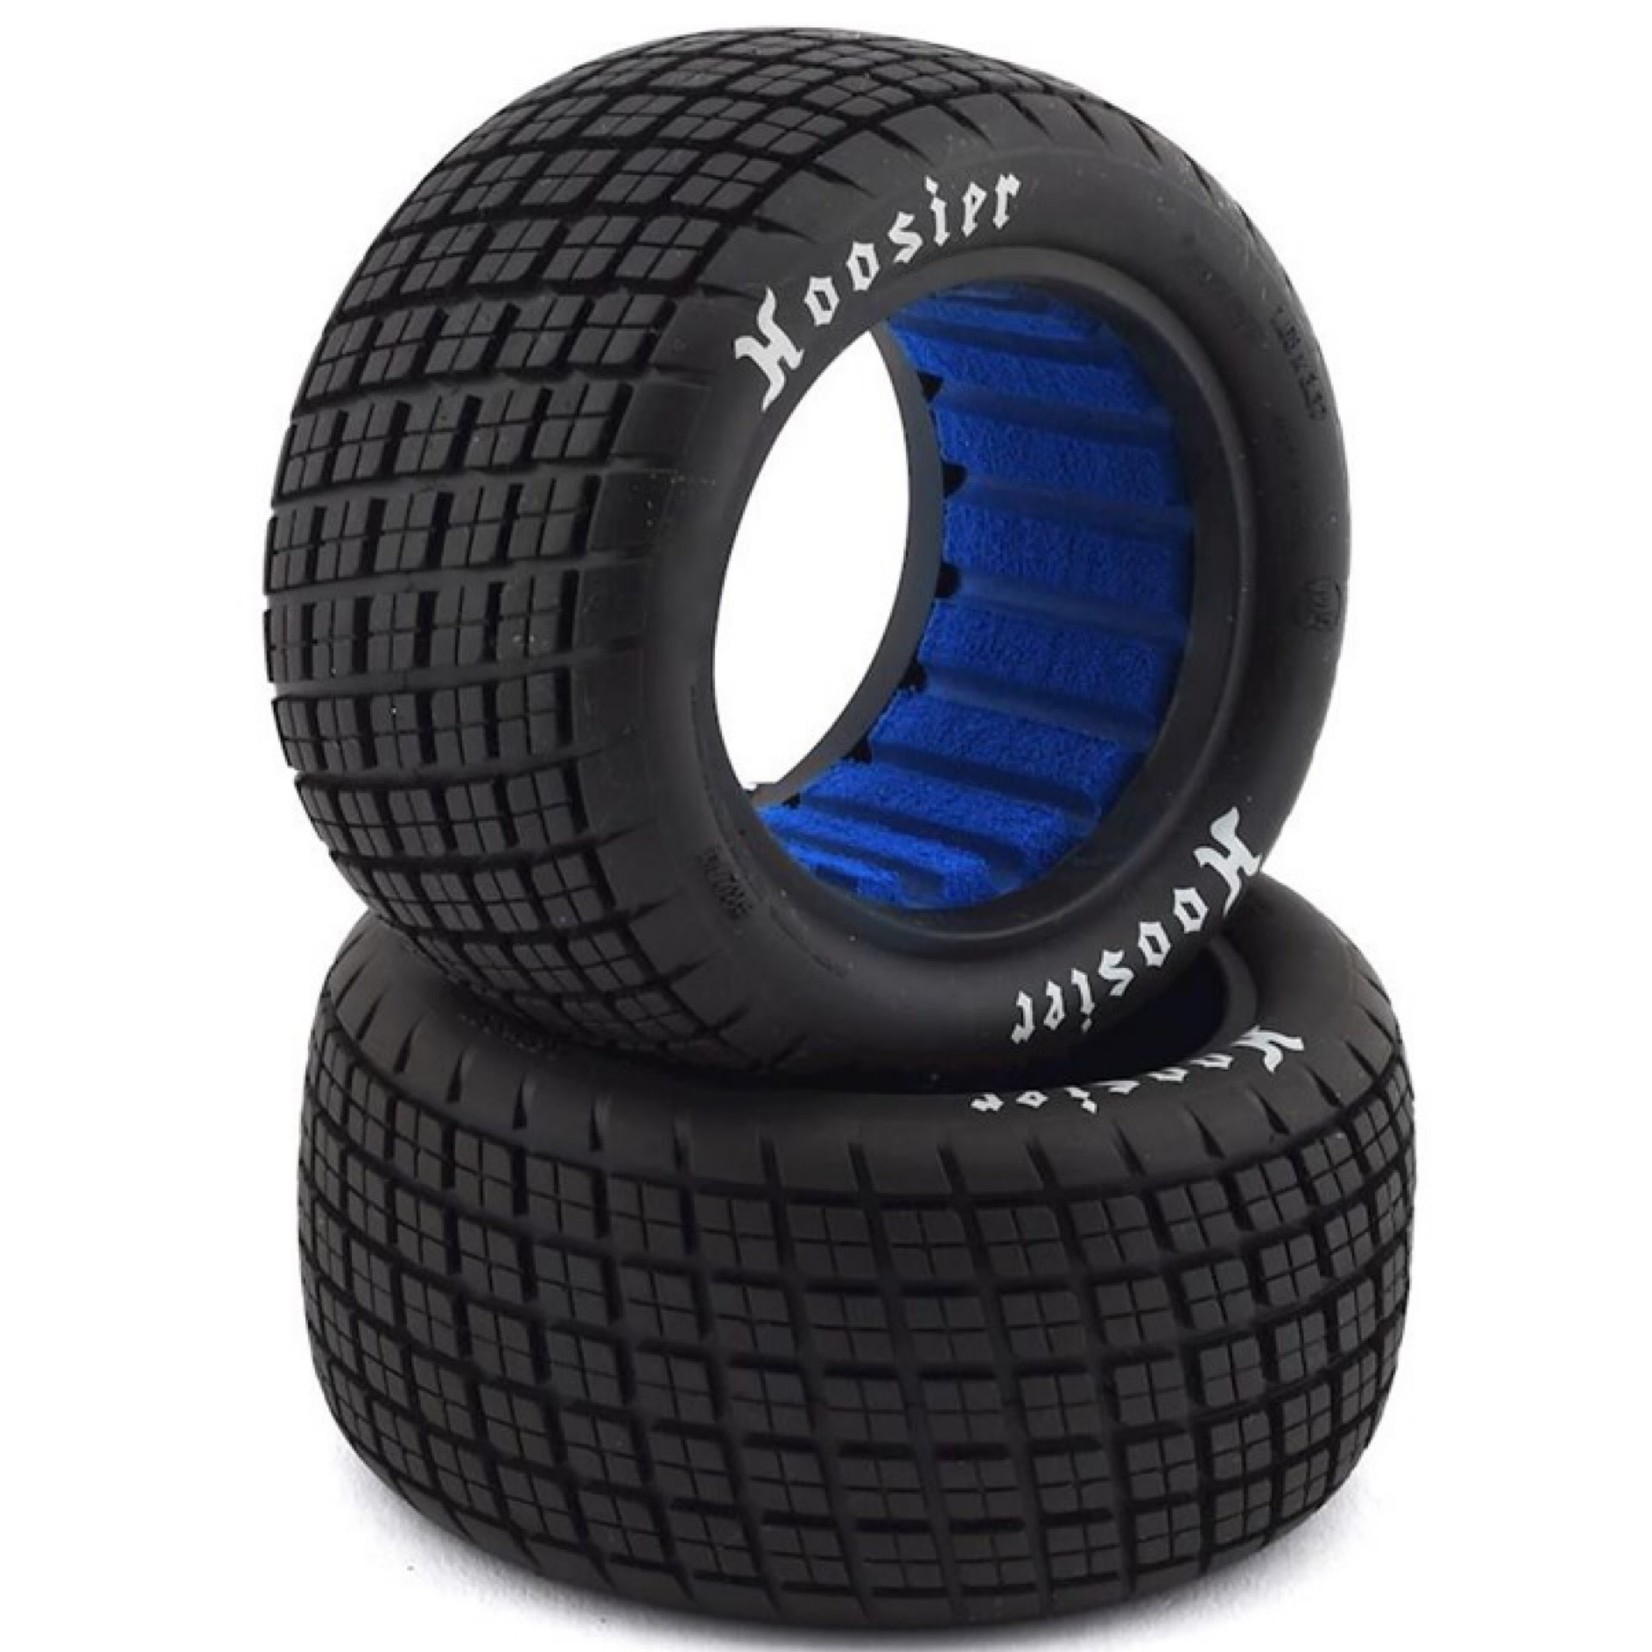 Pro-Line Pro-Line Hoosier Angle Block Dirt Oval 2.2" Rear Buggy Tires (2) (M3) #8274-03